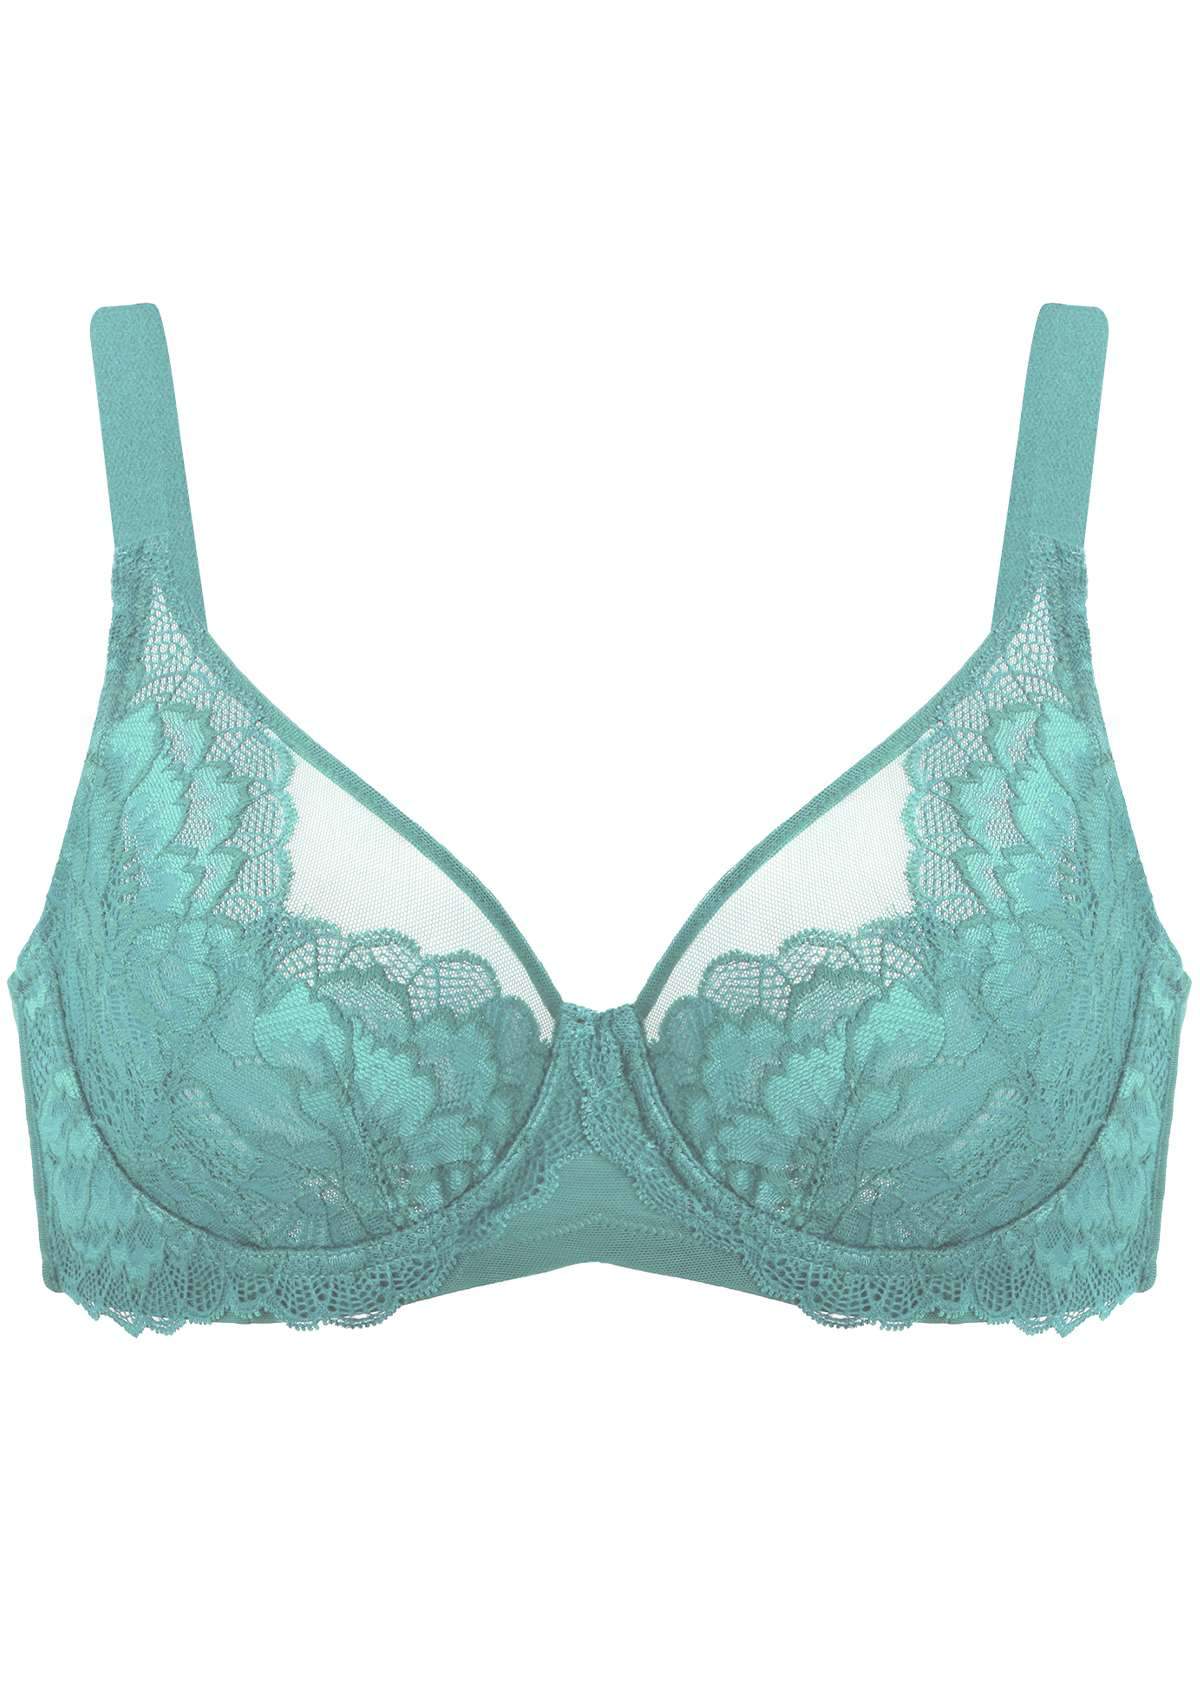 HSIA Paeonia Lace Full Coverage Underwire Non-Padded Uplifting Bra - Teal / 42 / DDD/F